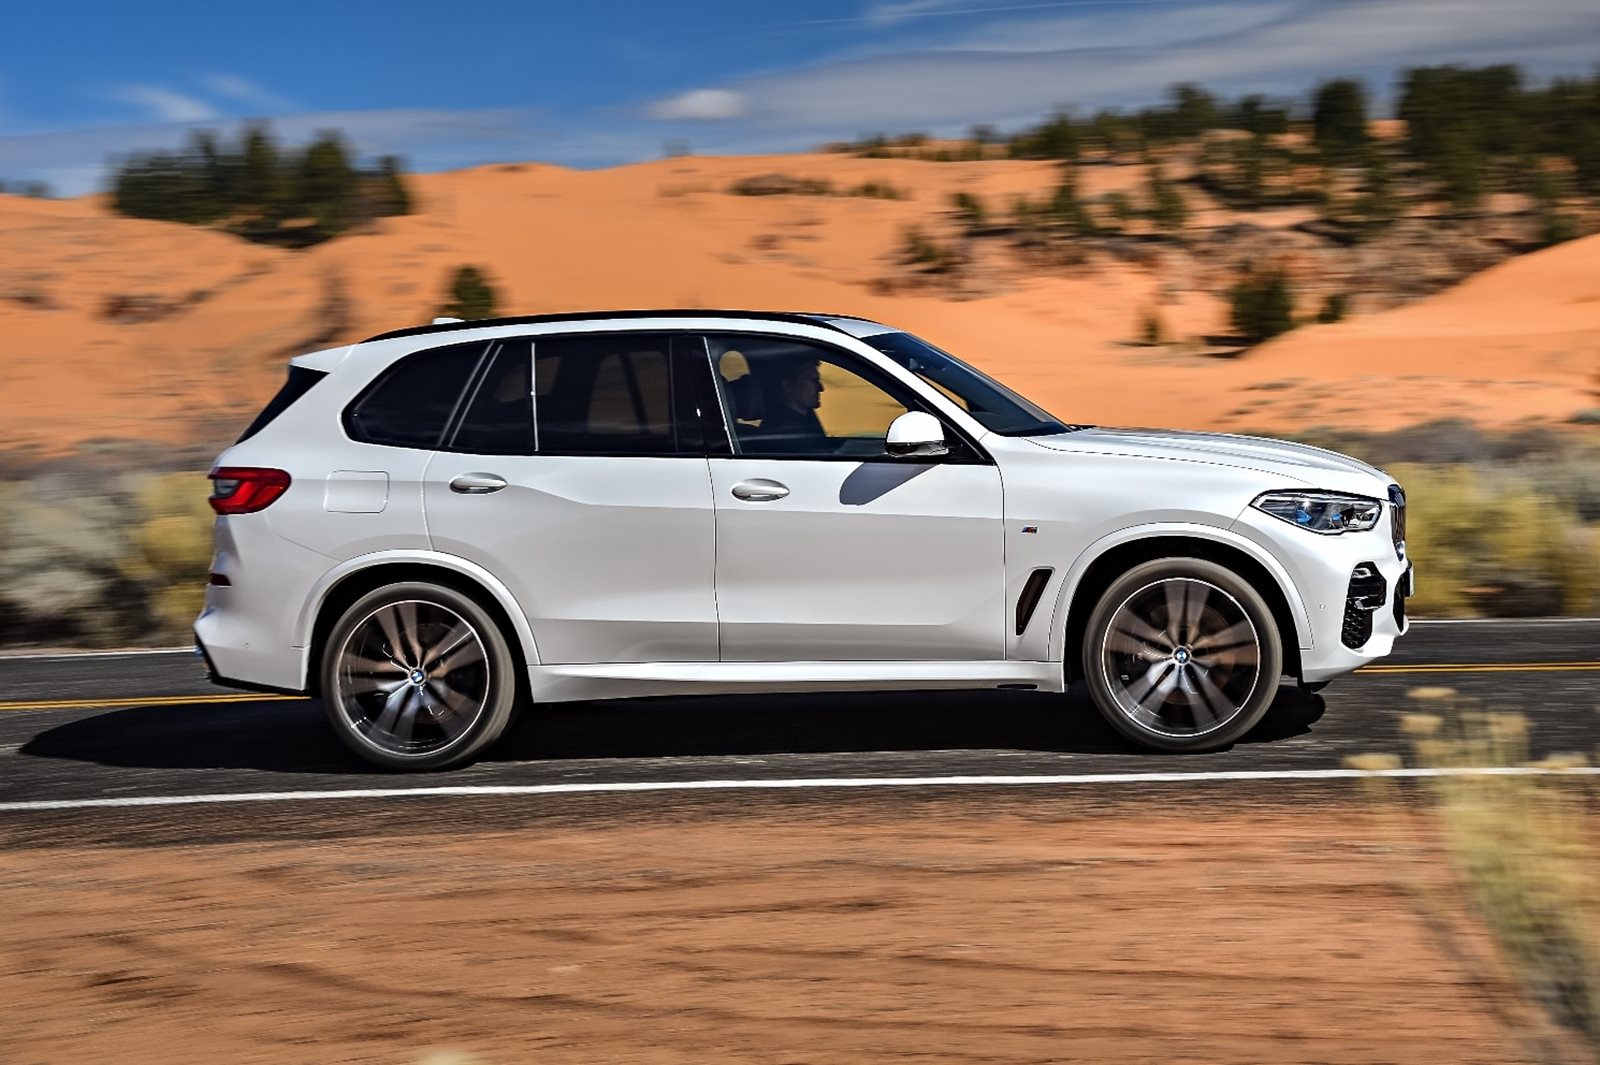 Is The 2019 BMW X5 (G05) A Stylistic Improvement Over Its F15 Predecessor?